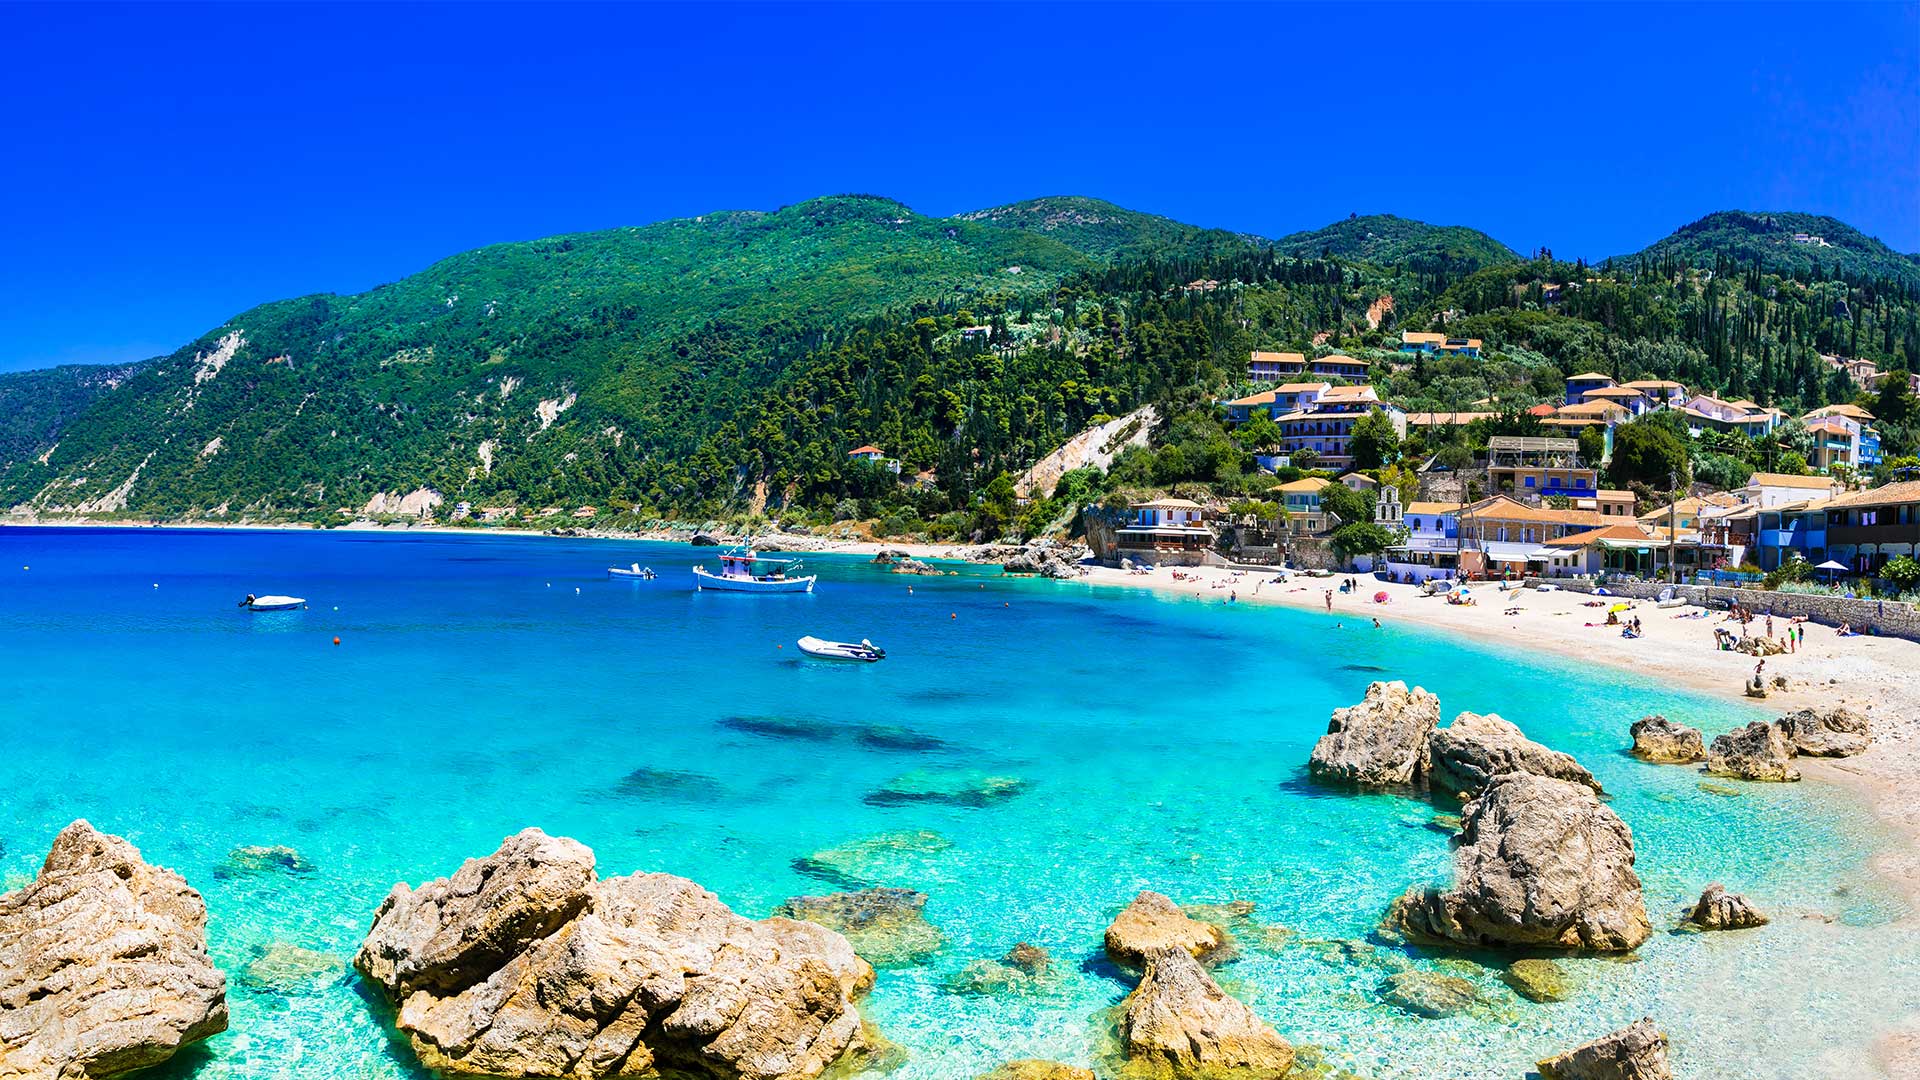 Agios Nikitas beach in Lefkada, clear turquoise waters with beachfront properties.